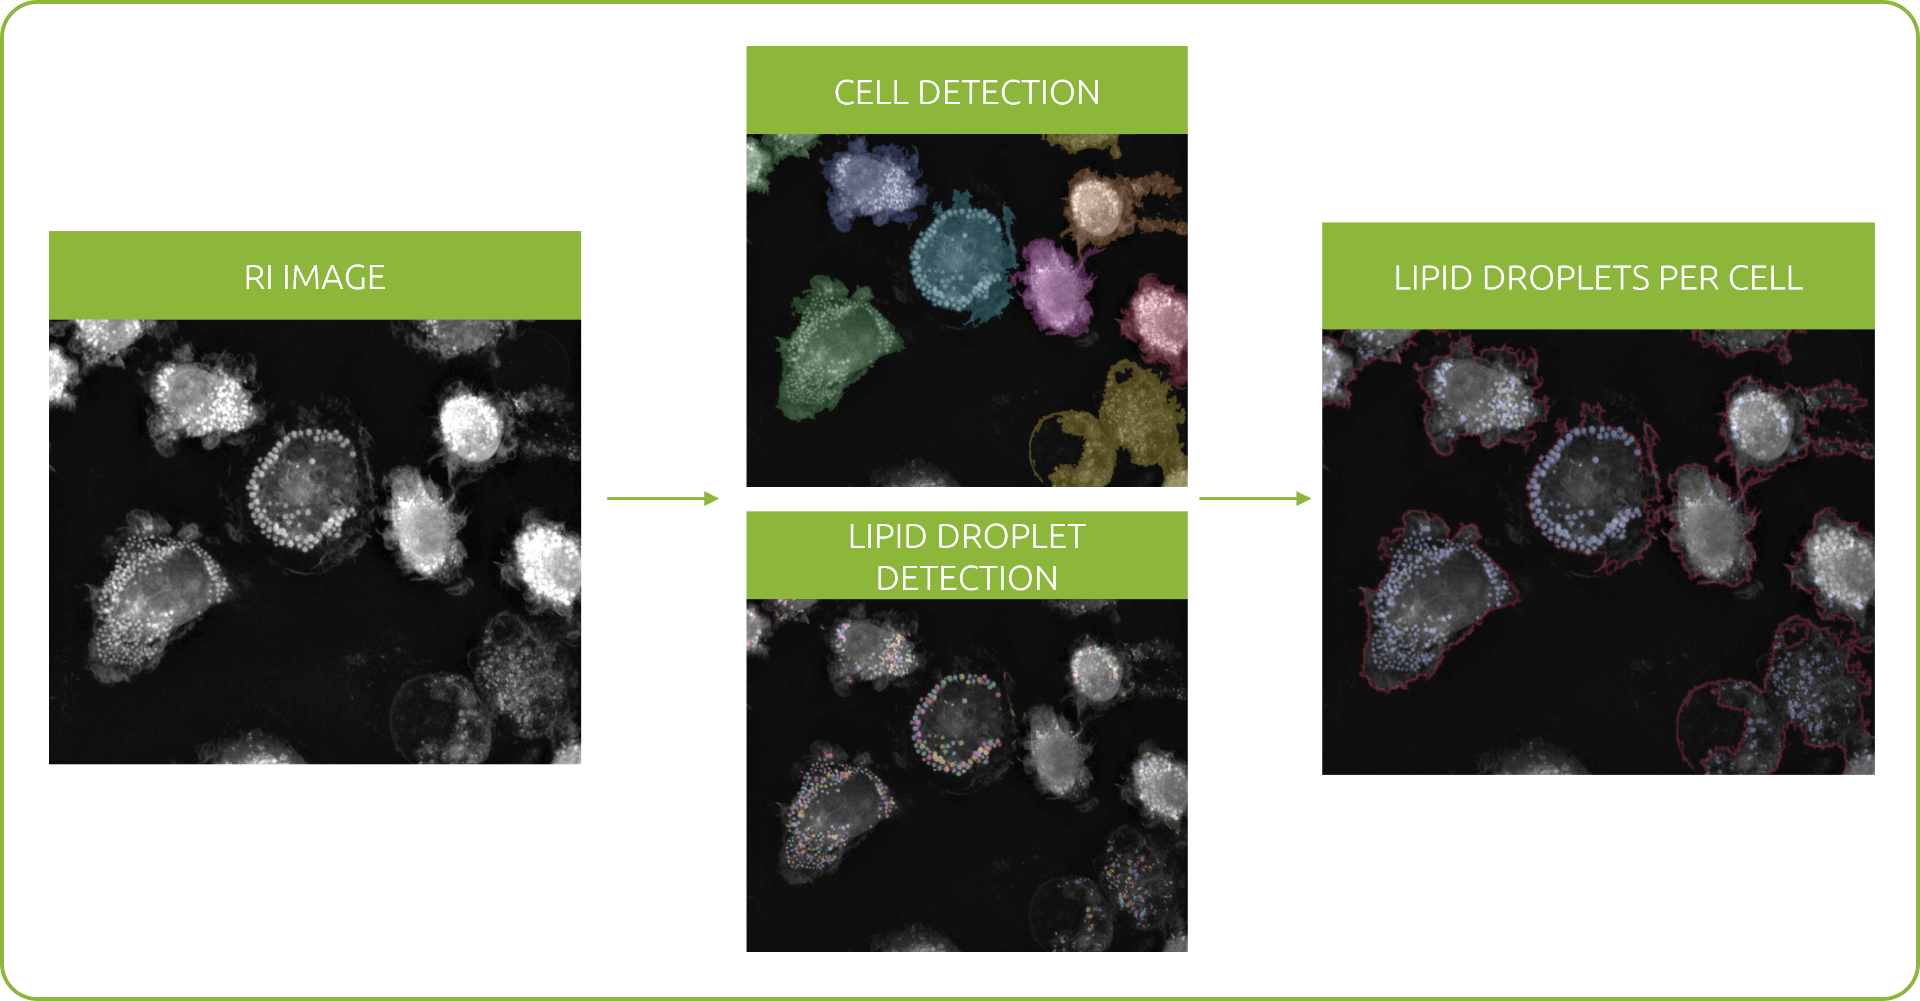 Image generation workflow in Nanolive's Smart Lipid Droplet Assay LIVE, from refractive (RI) image to lipid droplets per cell segmentation